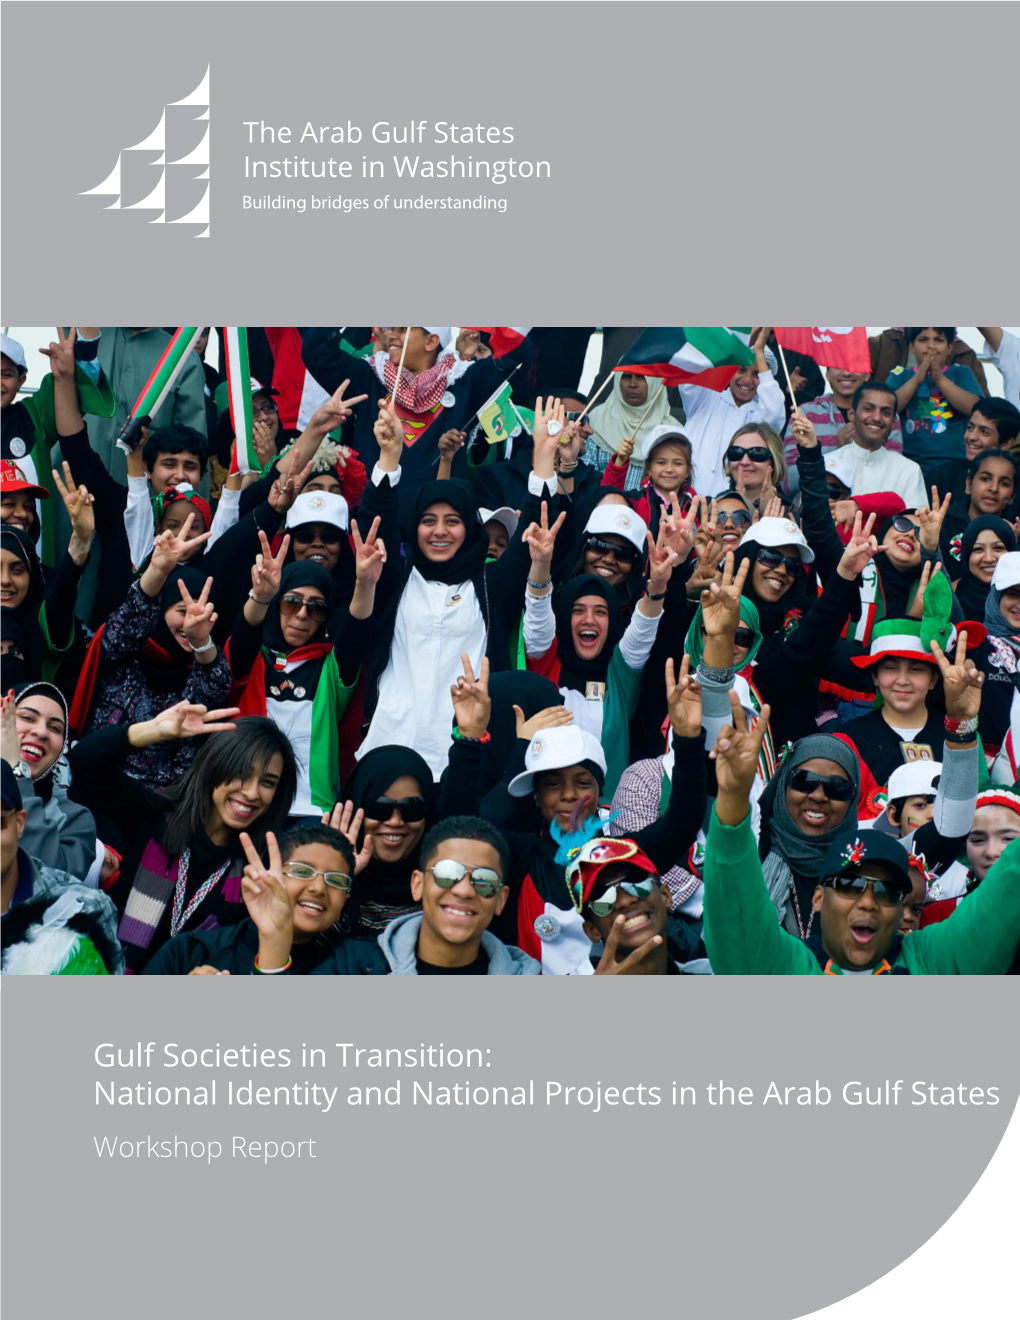 National Identity and National Projects in the Arab Gulf States Workshop Report June 10, 2016